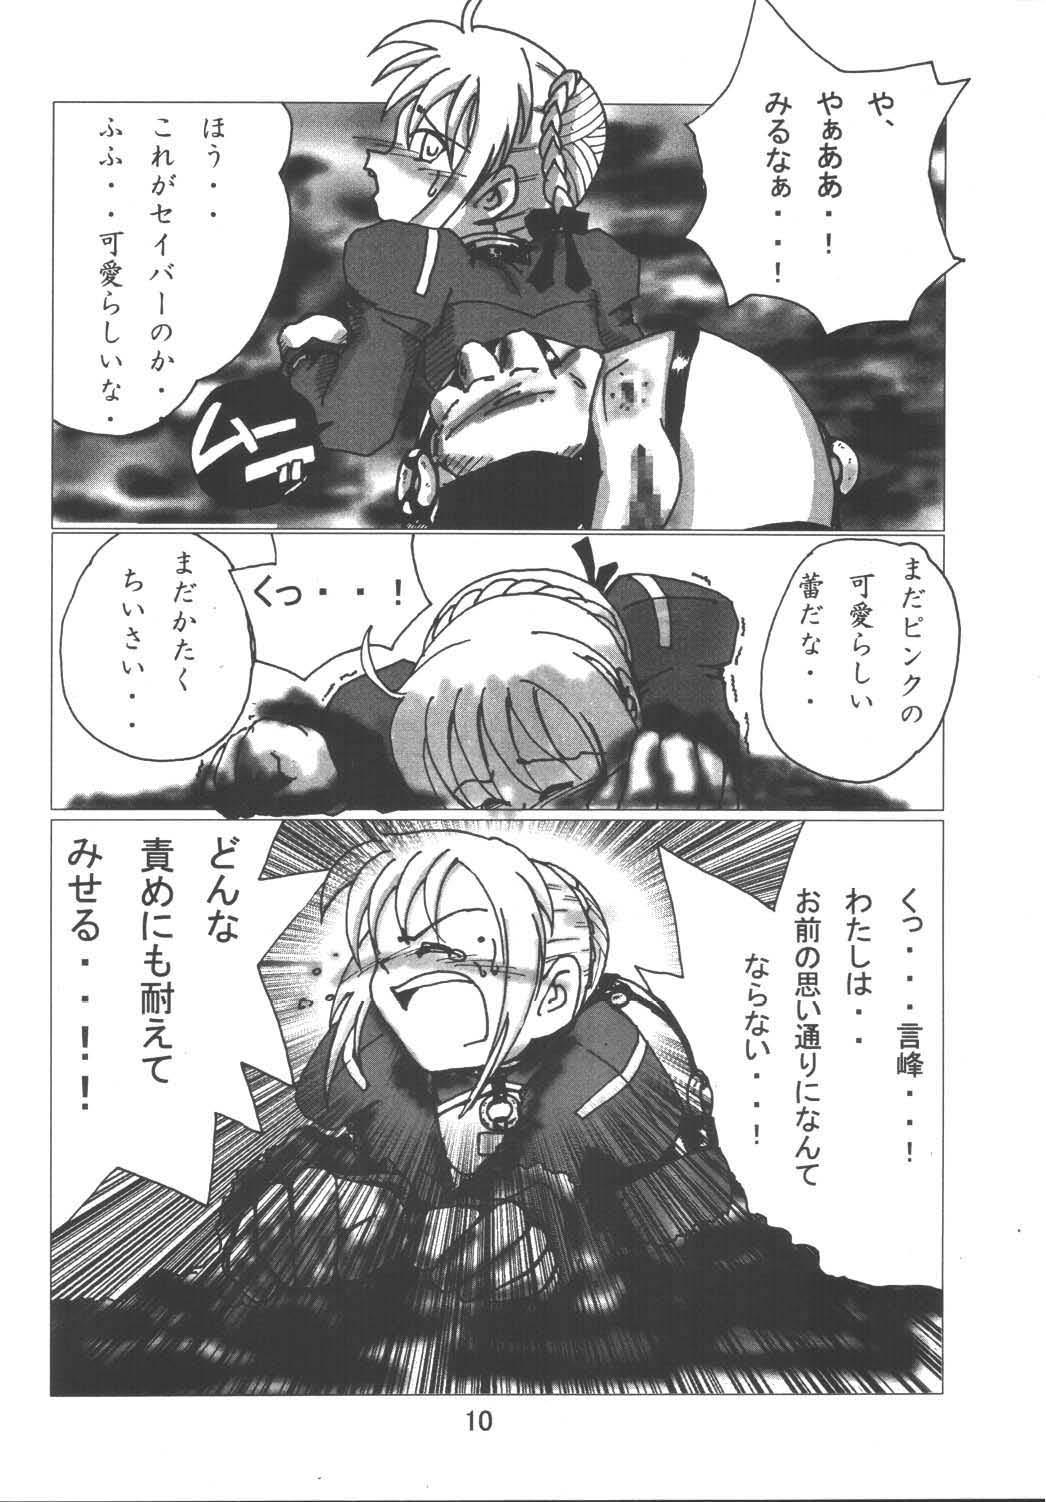 Orgasms Fate Nightmare For Saber - Fate stay night Horny Slut - Page 10